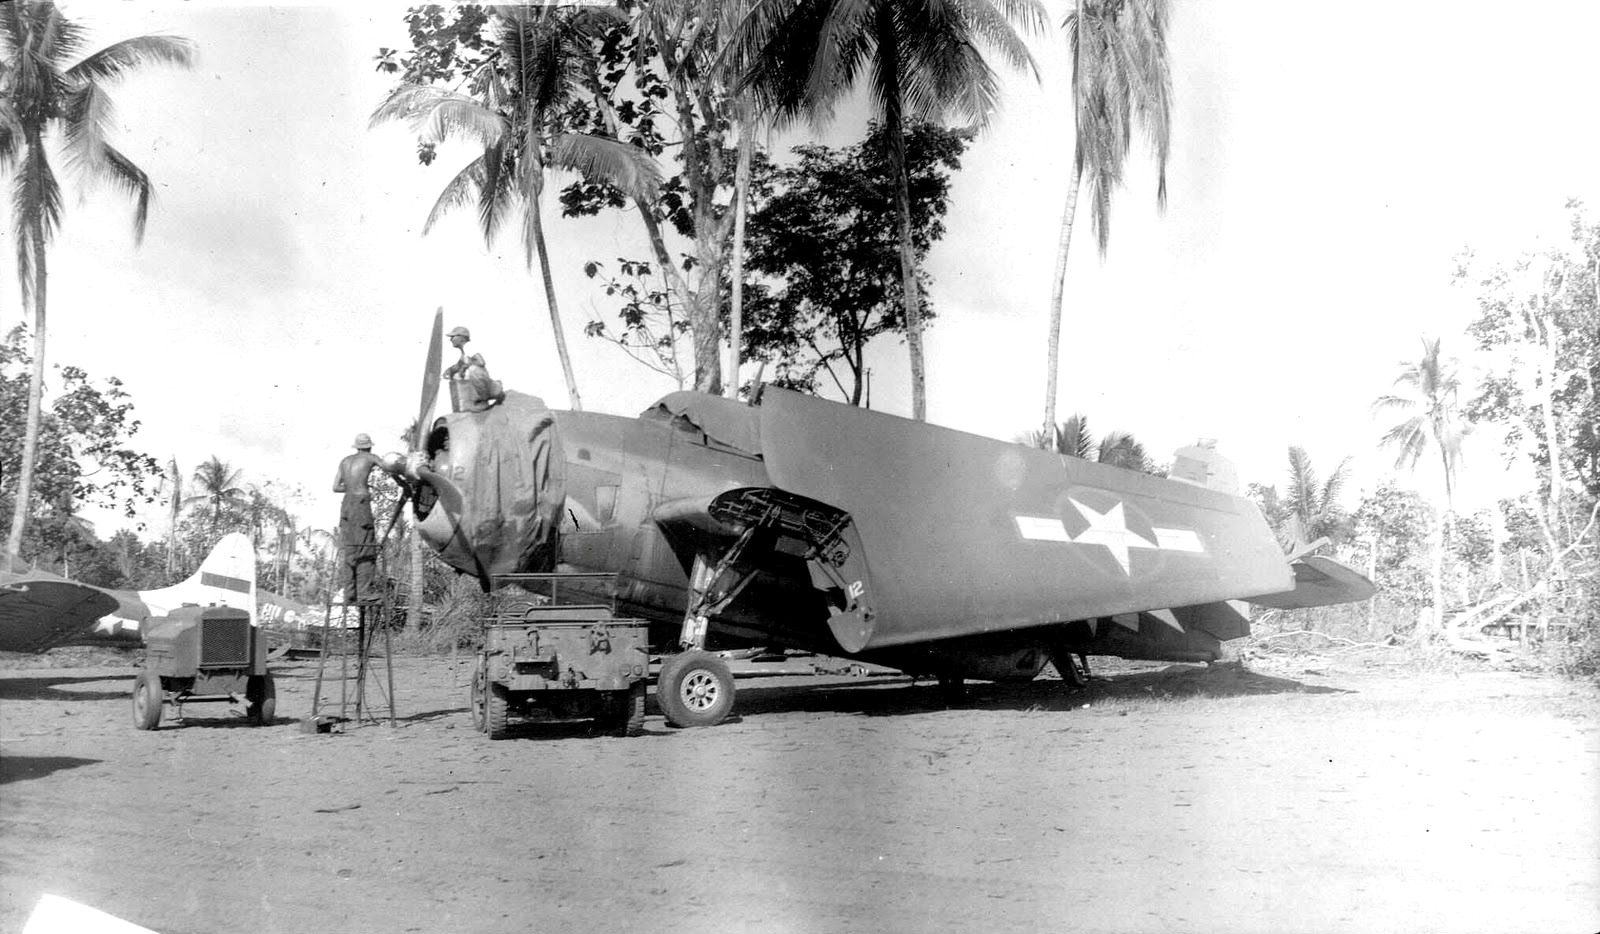 A Marine Corps TBM-1C Avenger of the 7th Fleet Command undergoing some maintenance at the Cyclops aerodrome, Hollandia, New Guinea, Jul-Aug 1943. Note the Jeep and the tail of an Army A-24 Banshee painted as a target tug.